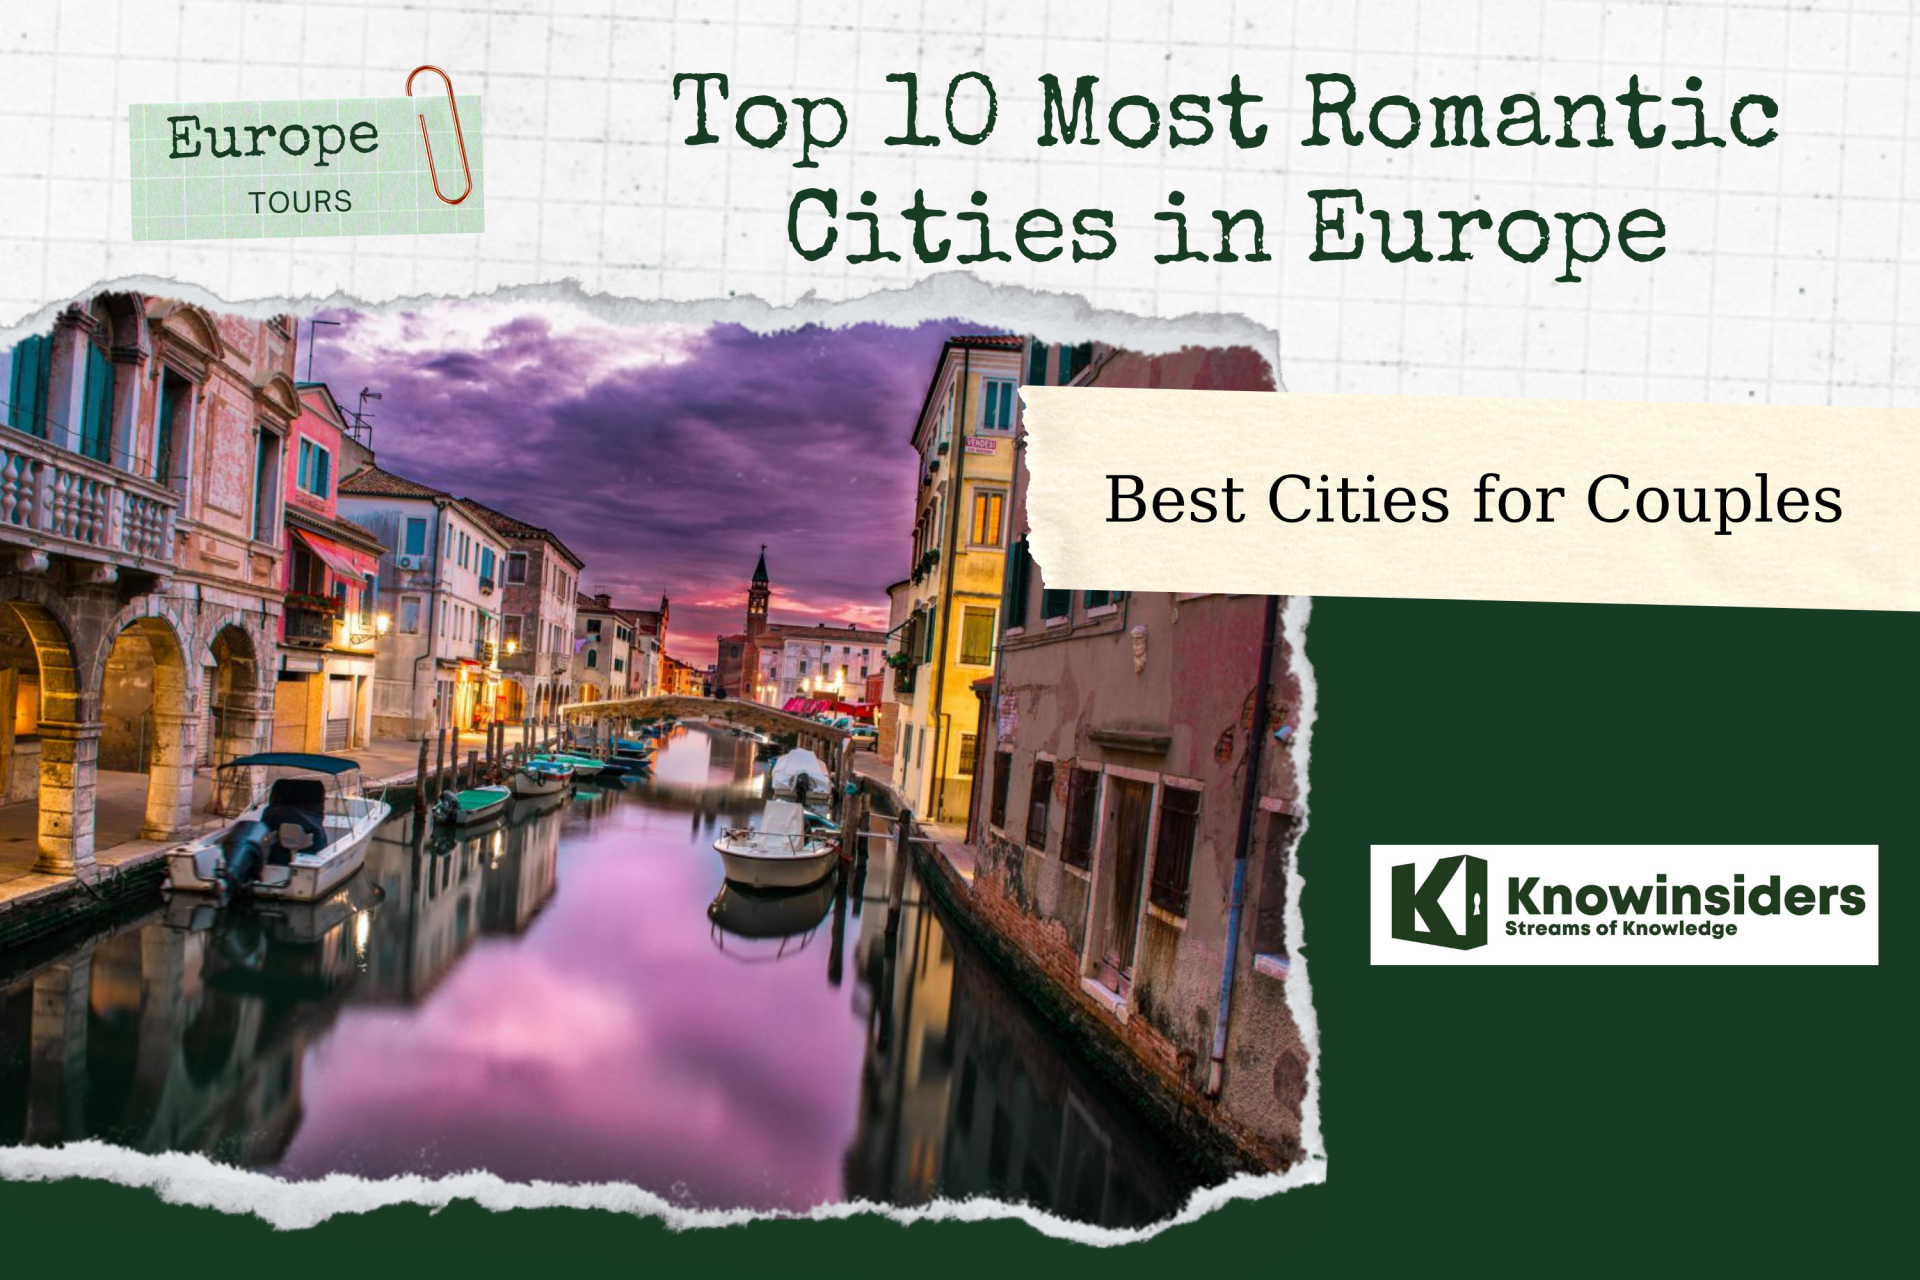 Top 10 Most Romantic Cities in Europe